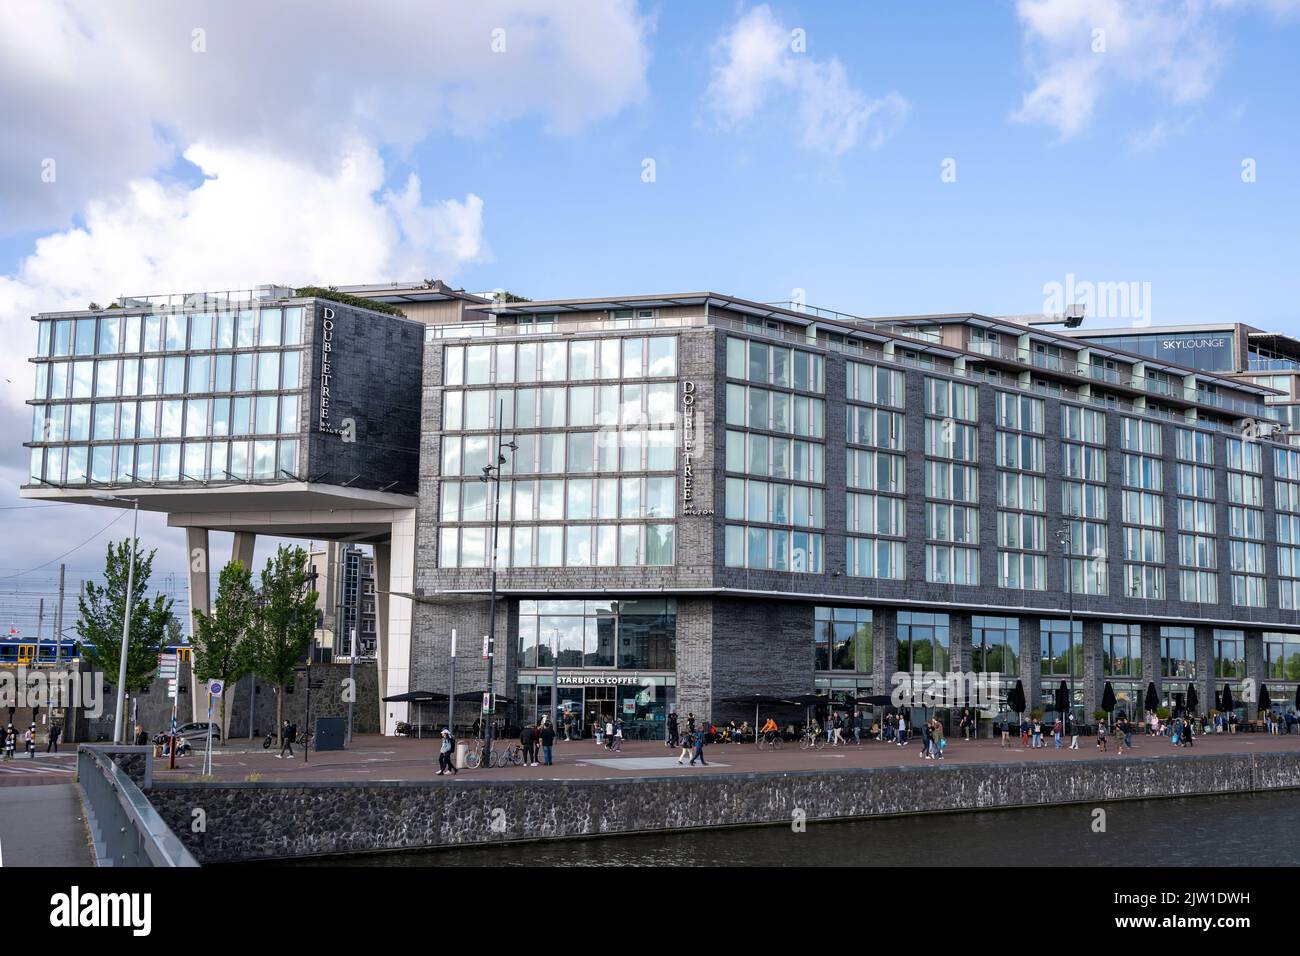 A general view of the Doubletree by Hilton hotel in Amsterdam, Holland. Stock Photo